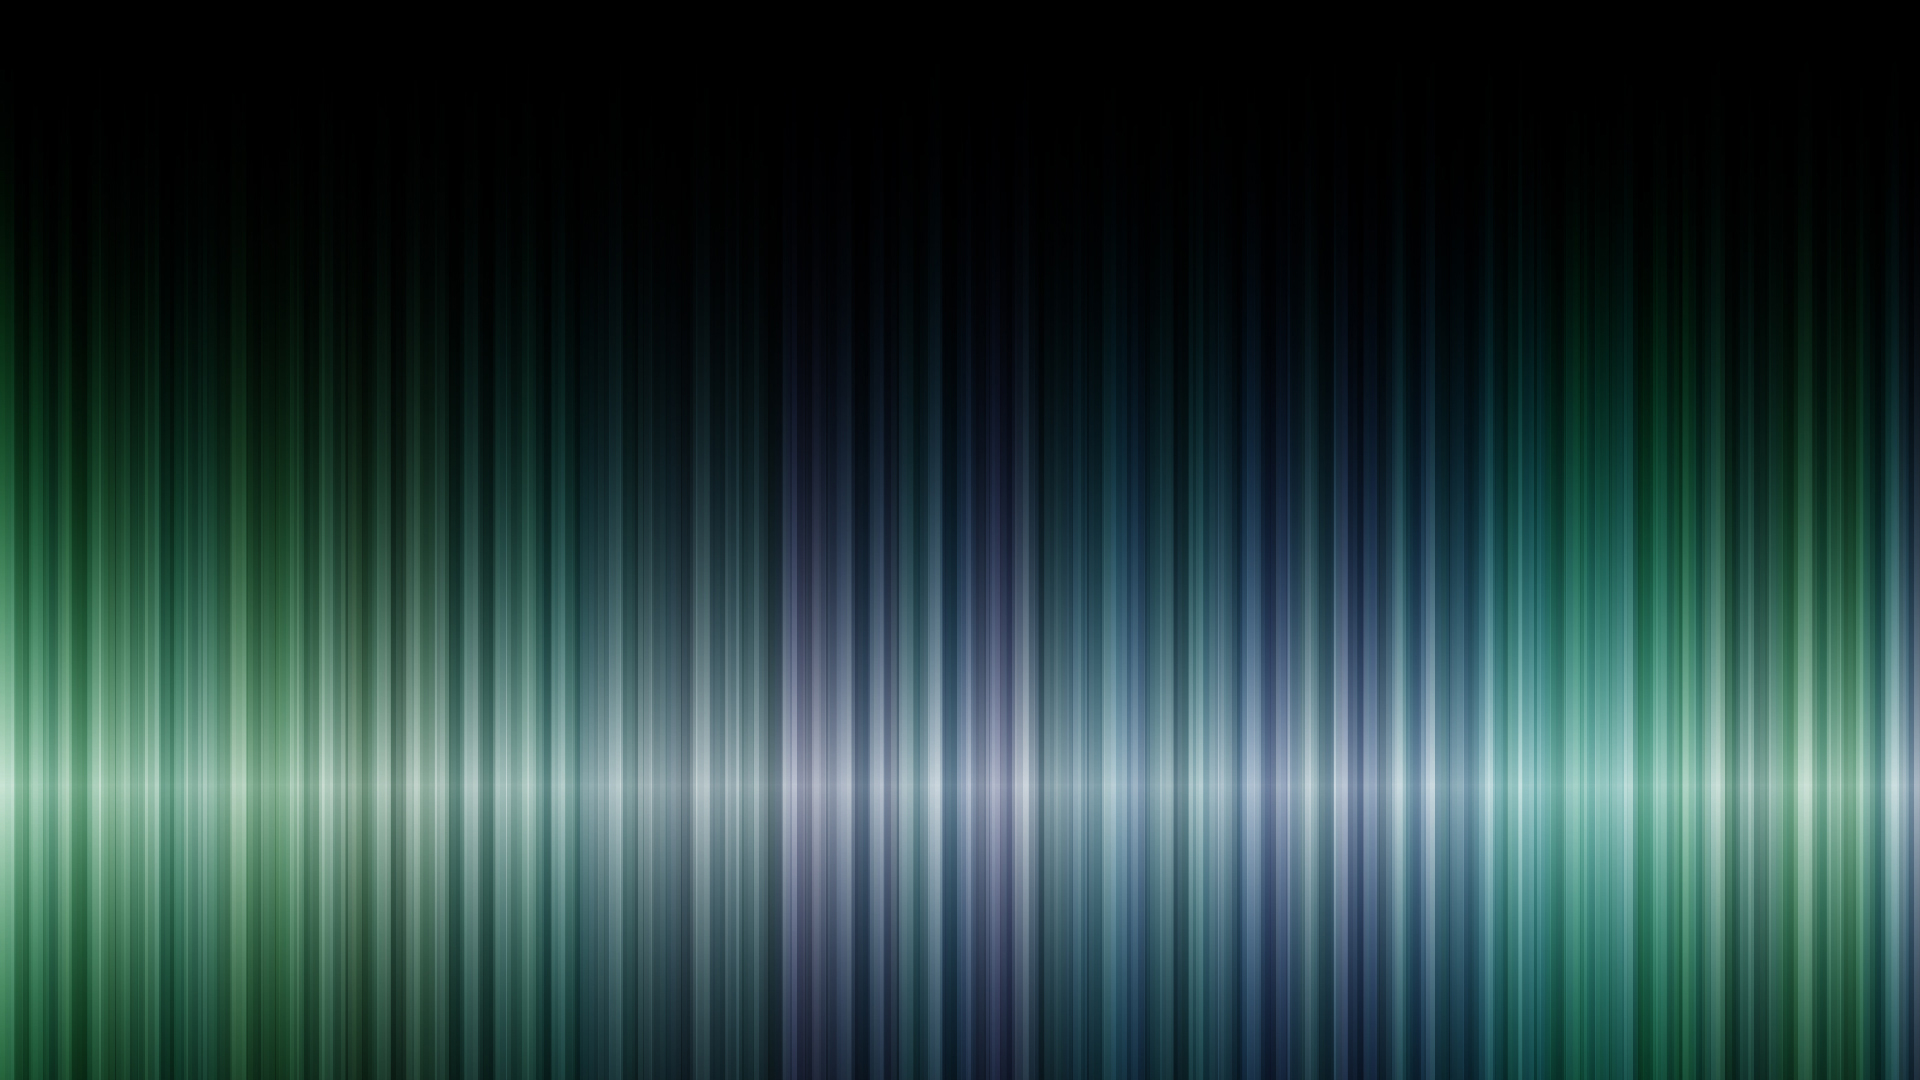 colorline wallpaper pack 1080p by angelicbond customization wallpaper 1920x1080